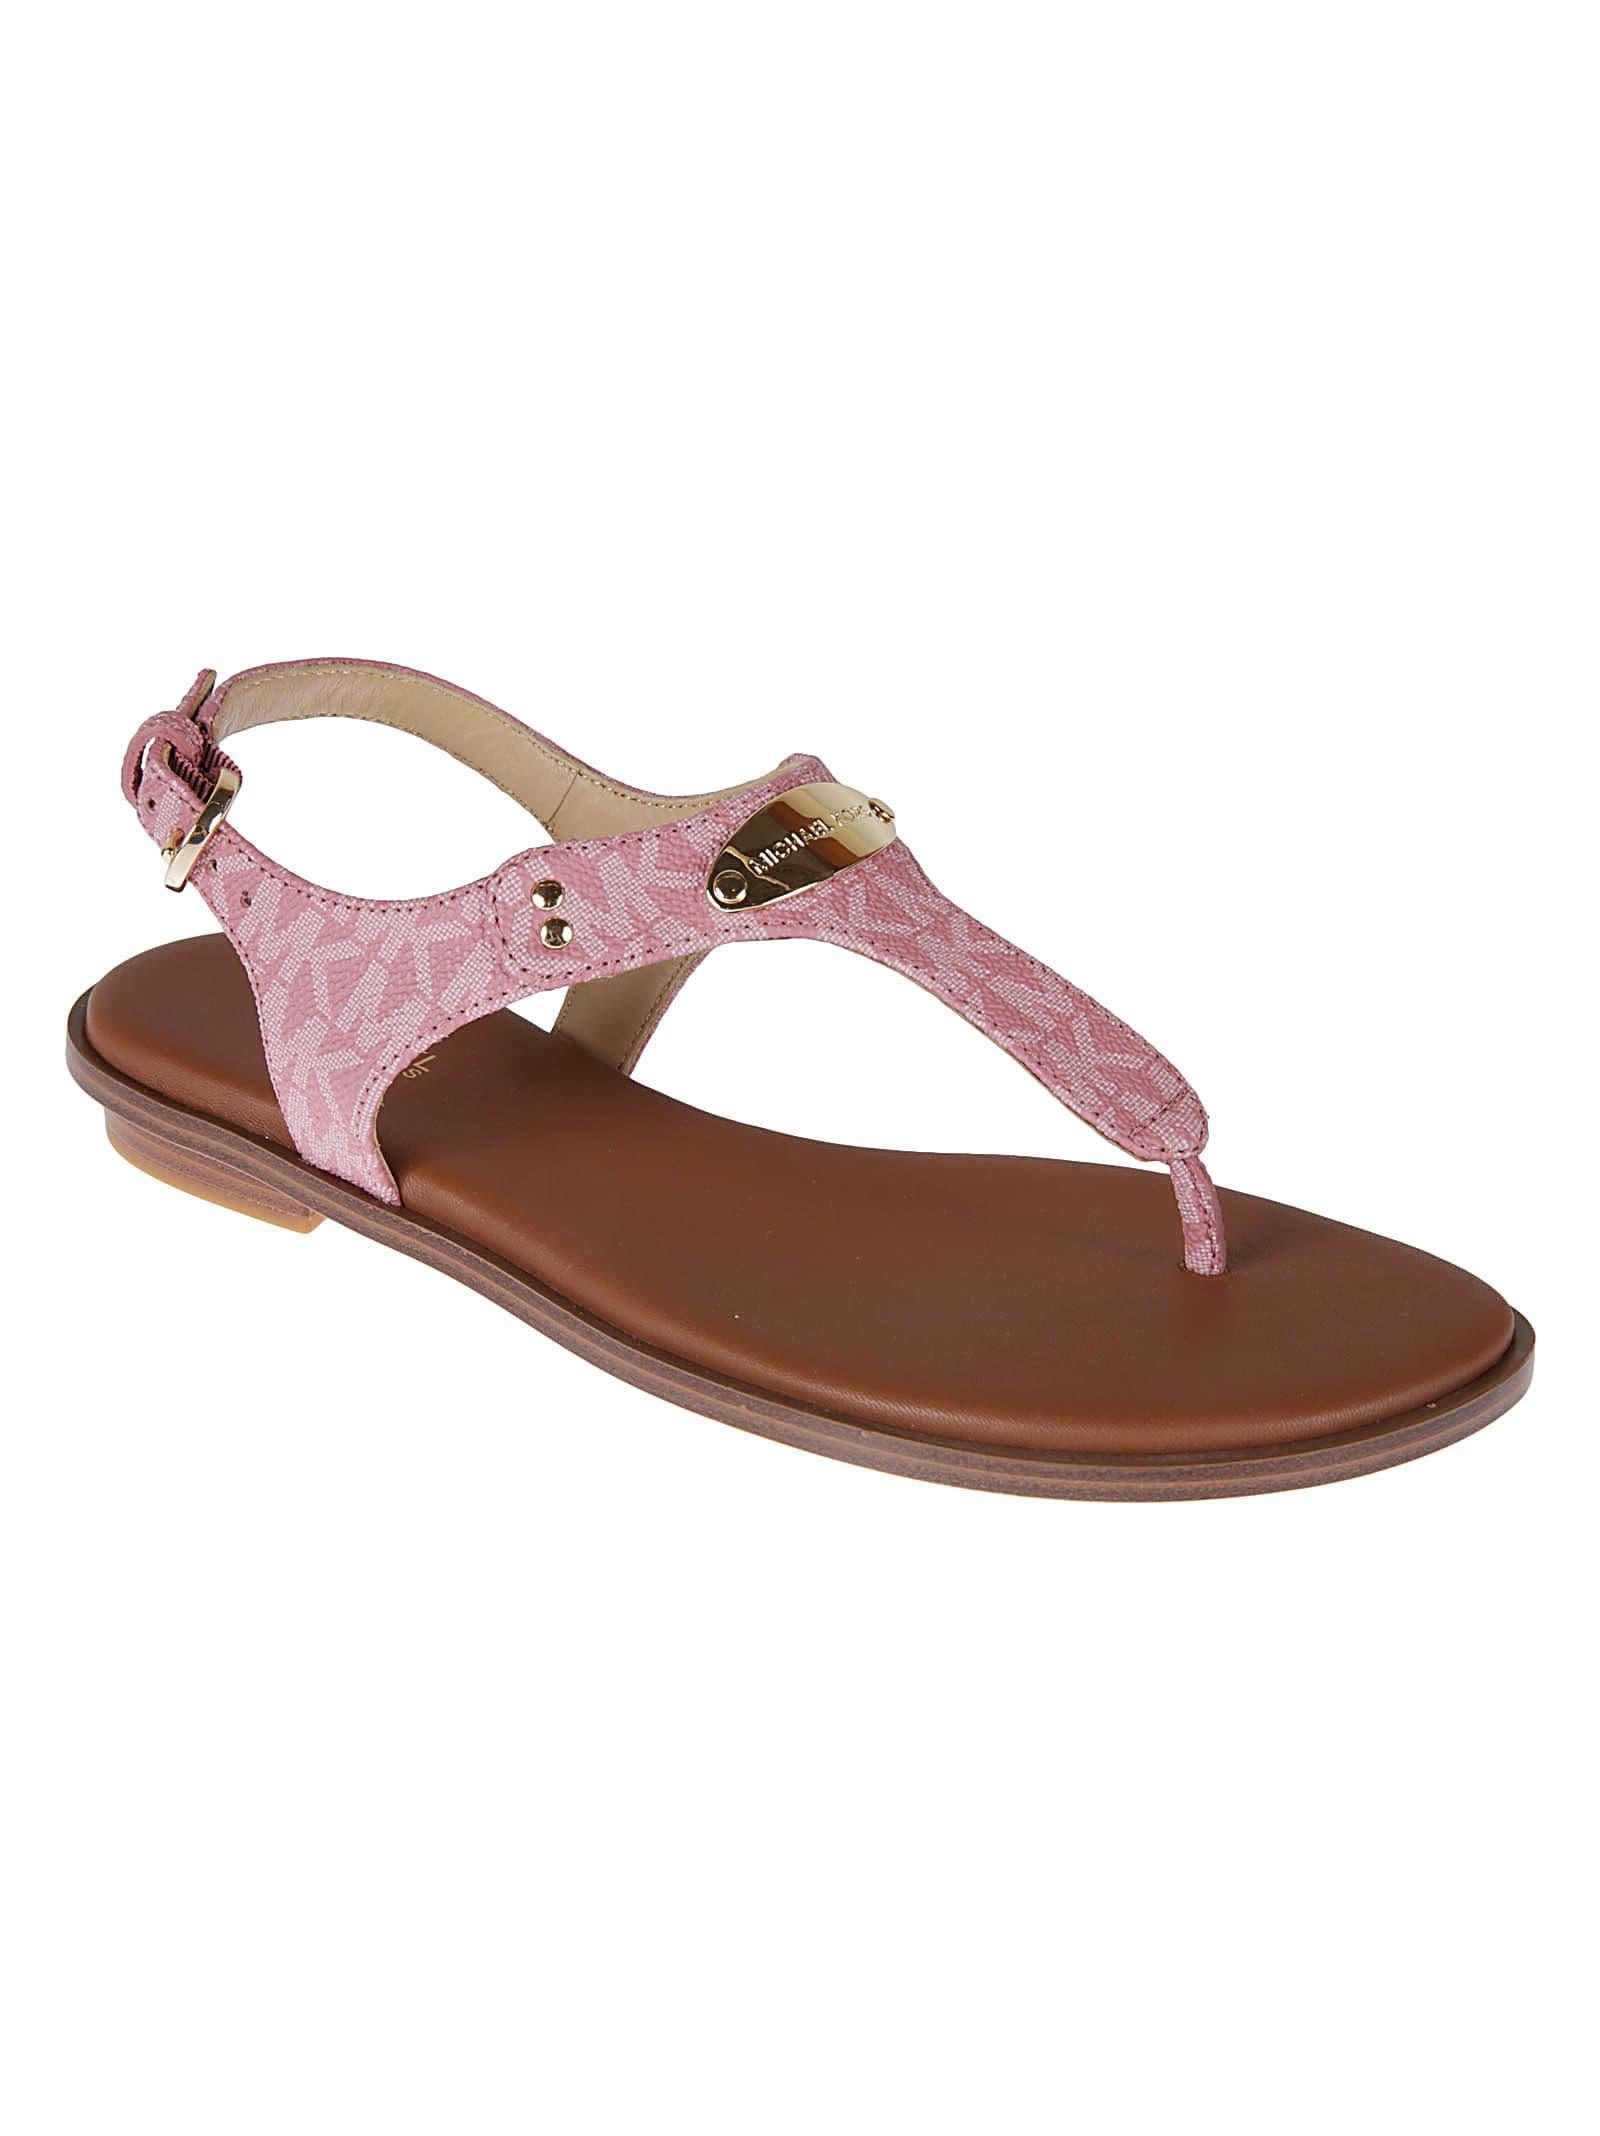 Michael Kors Mk Plate Thong Sandals in Pink | Lyst